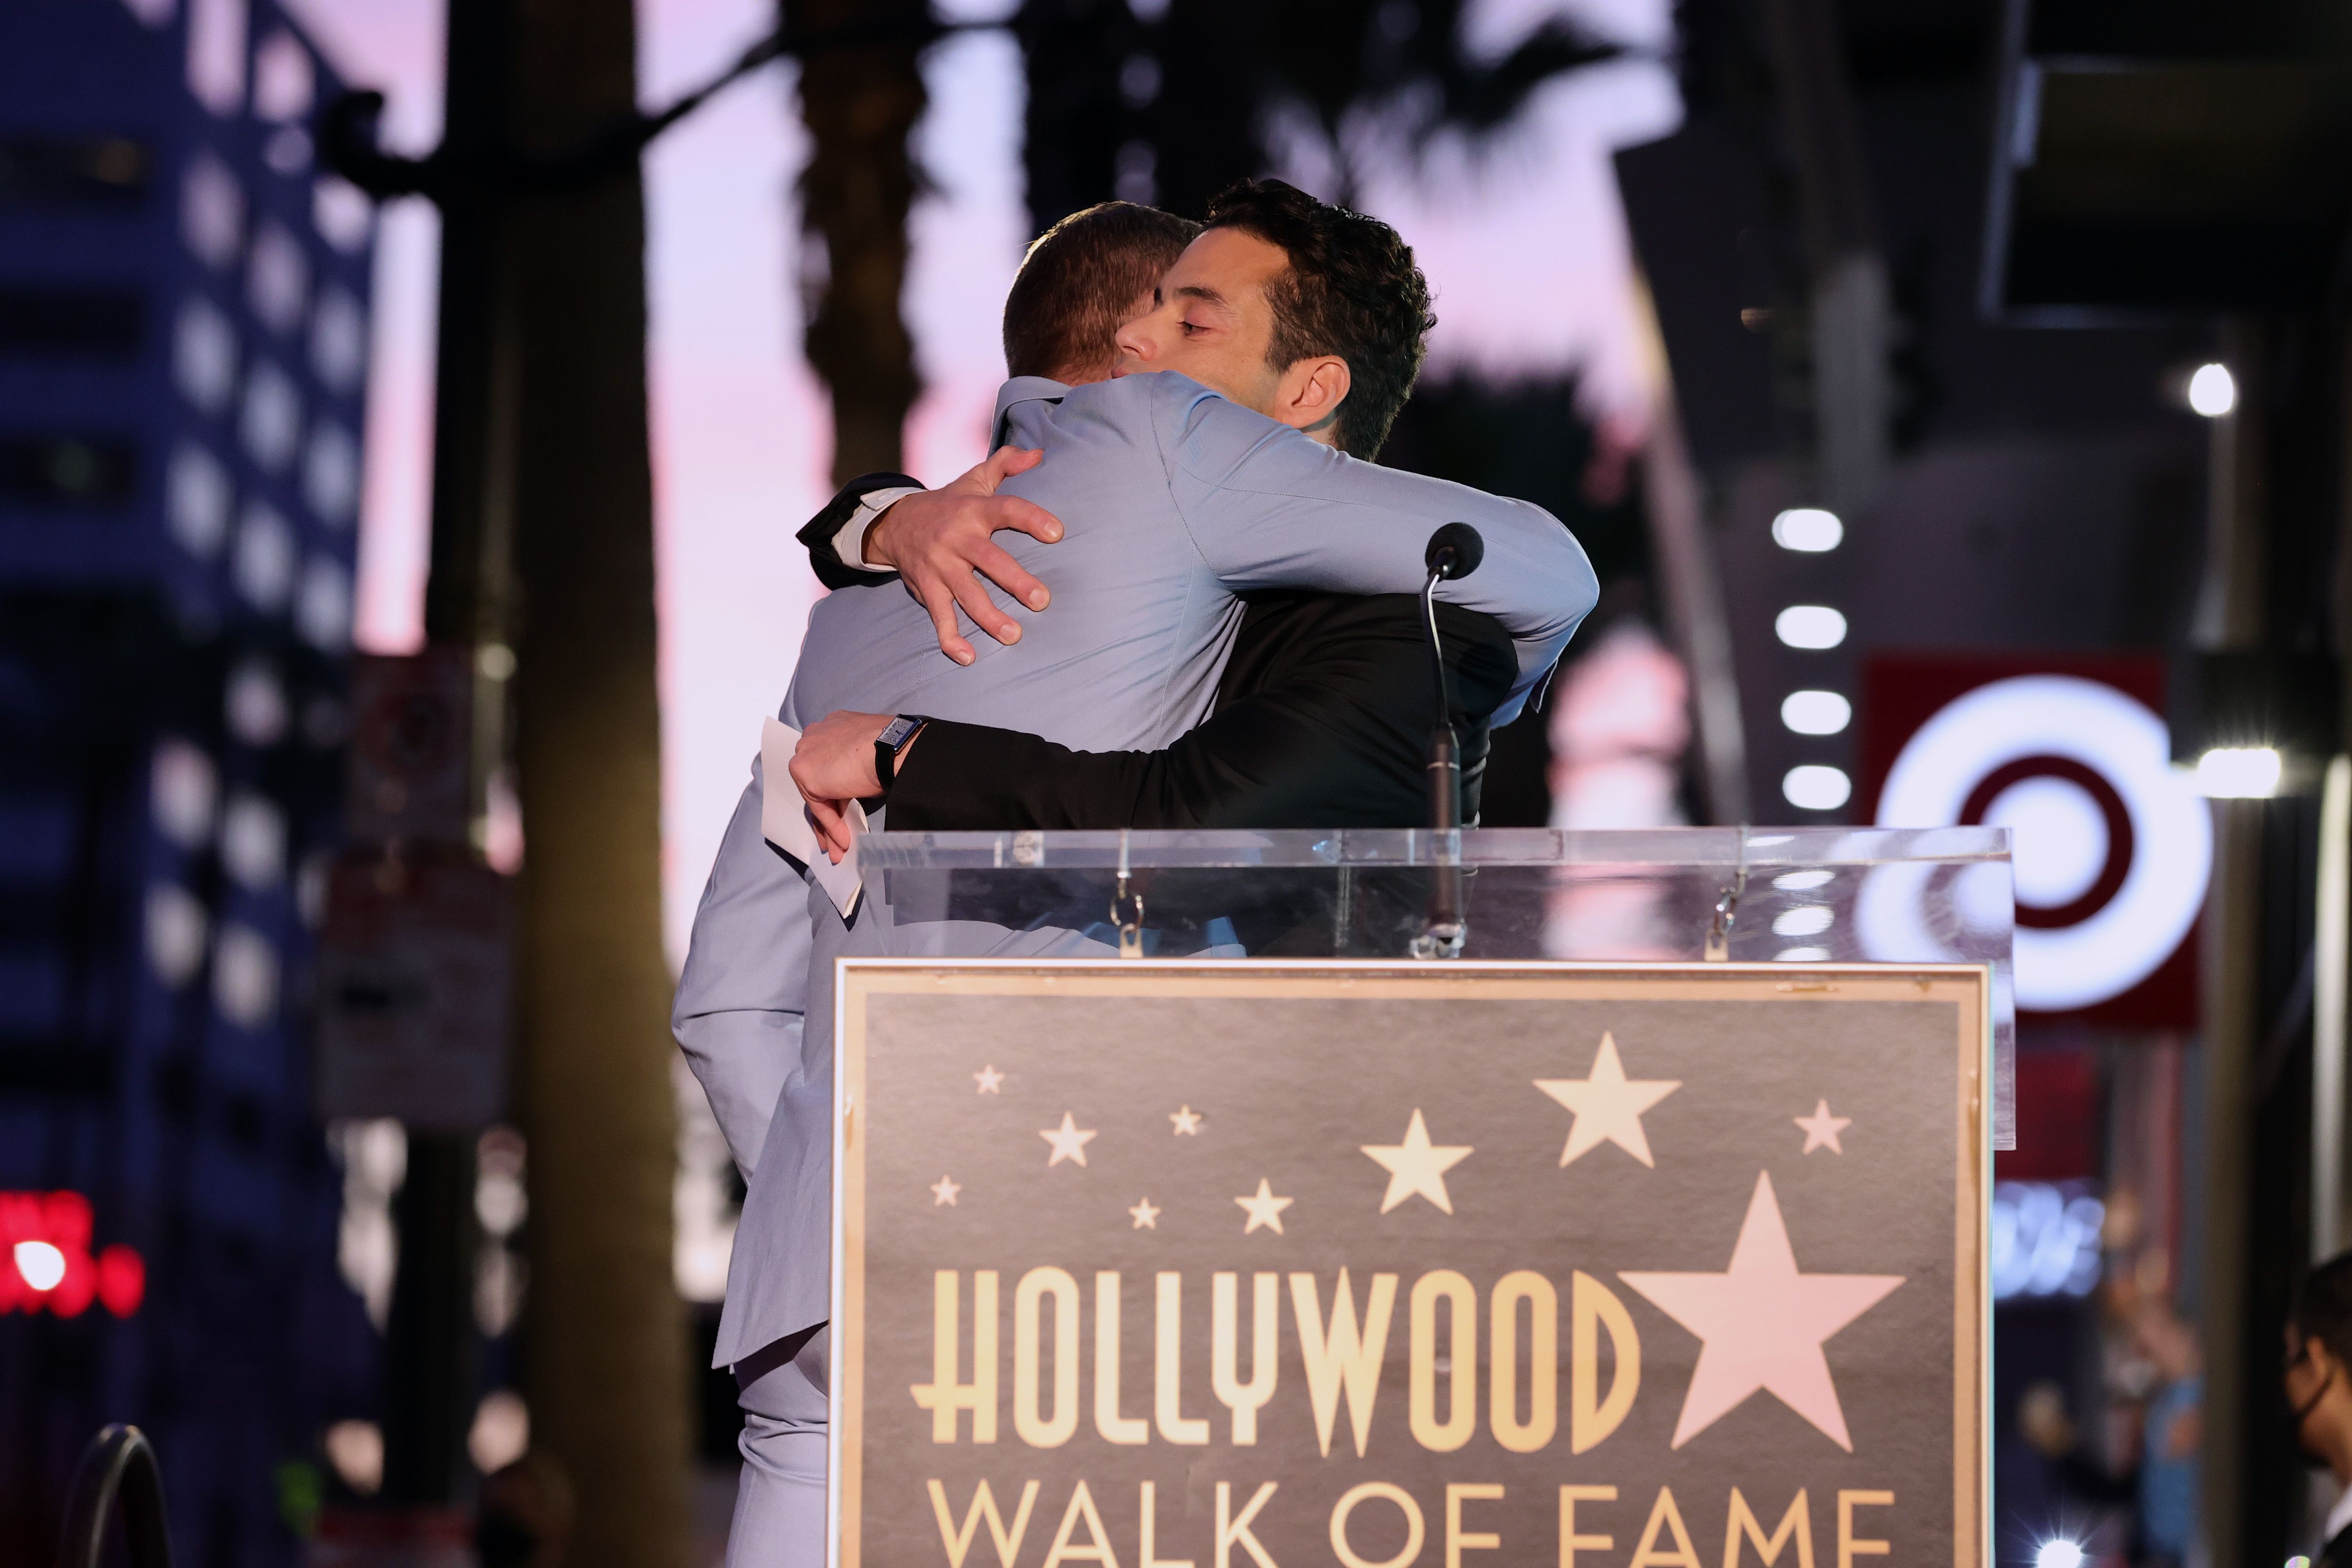 Daniel Craig, left, and Rami Malek attend the Hollywood Walk of Fame Star Ceremony for Daniel Craig on Oct. 6, 2021, in Hollywood, Calif.